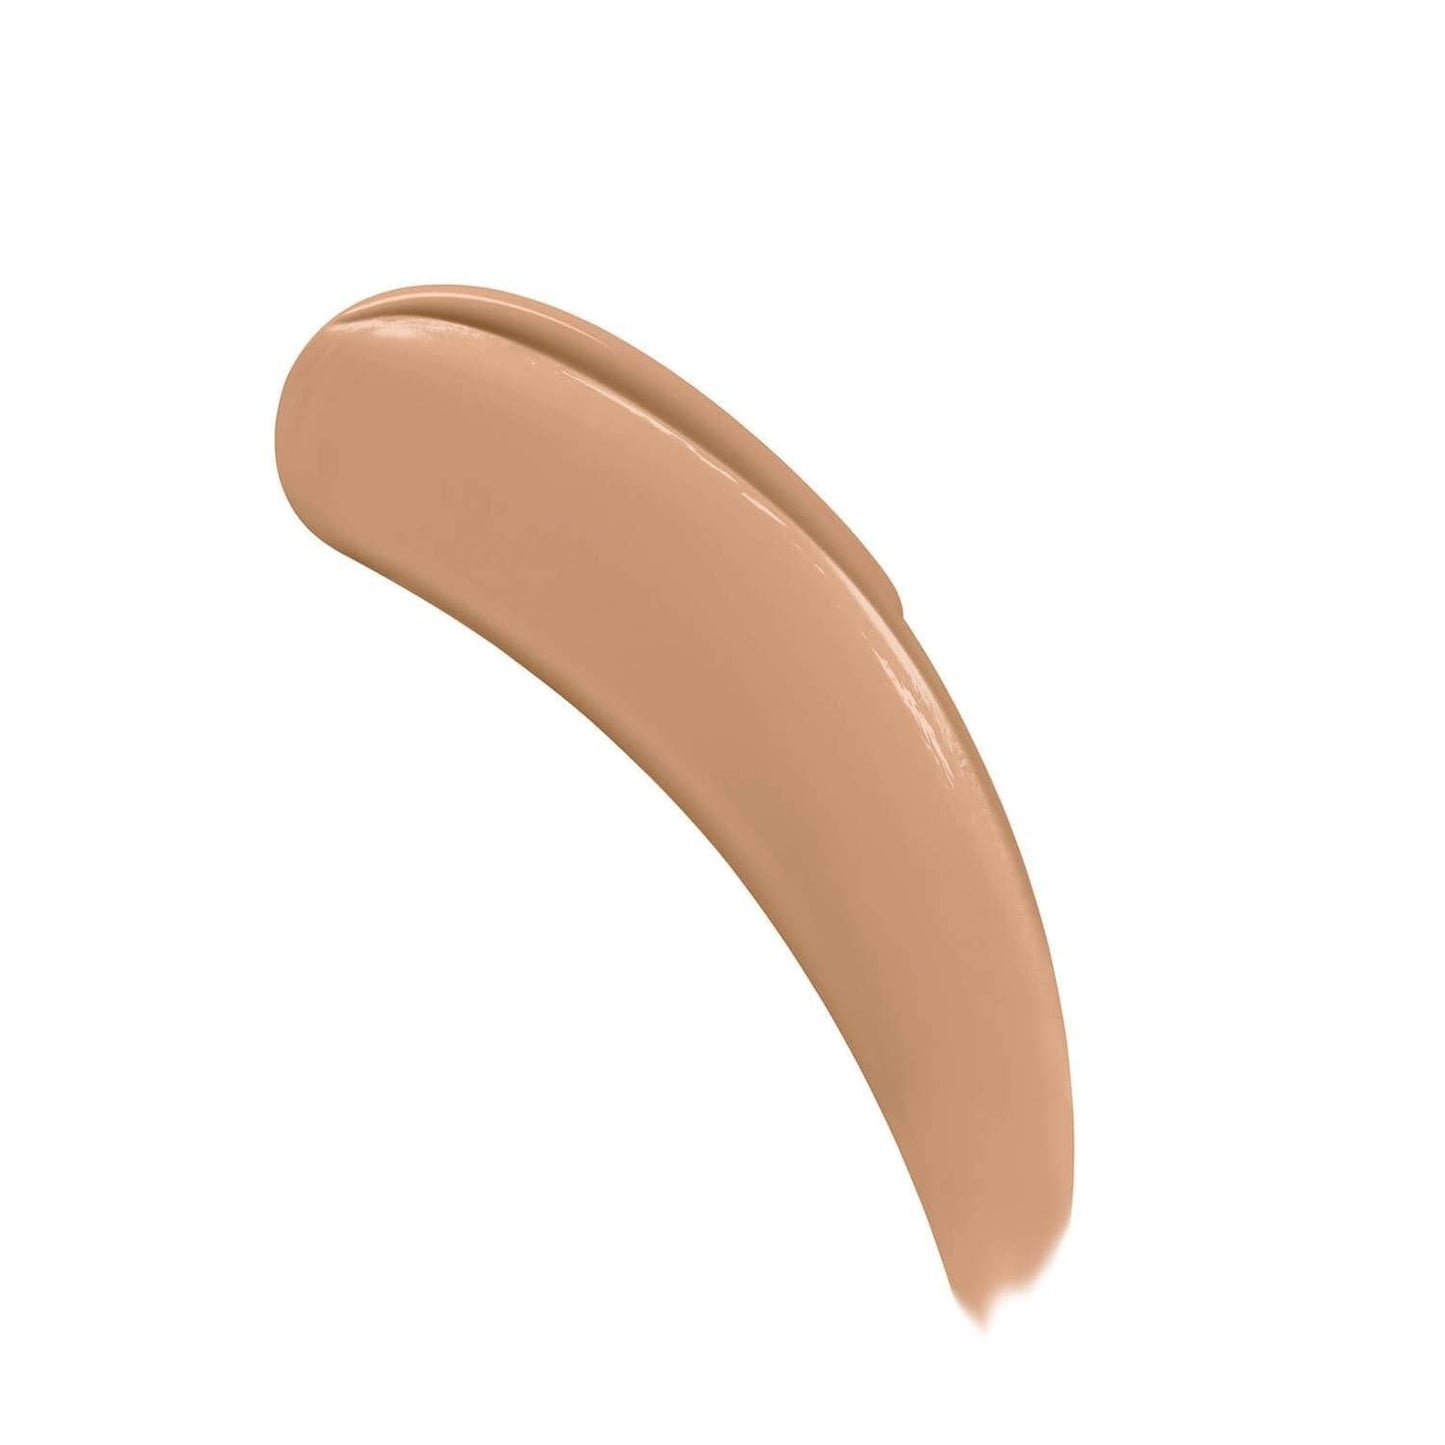 IT COSMETICS Beauty IT Cosmetics Your Skin But Better Foundation and Skincare 30ml - 39 Tan Neutral